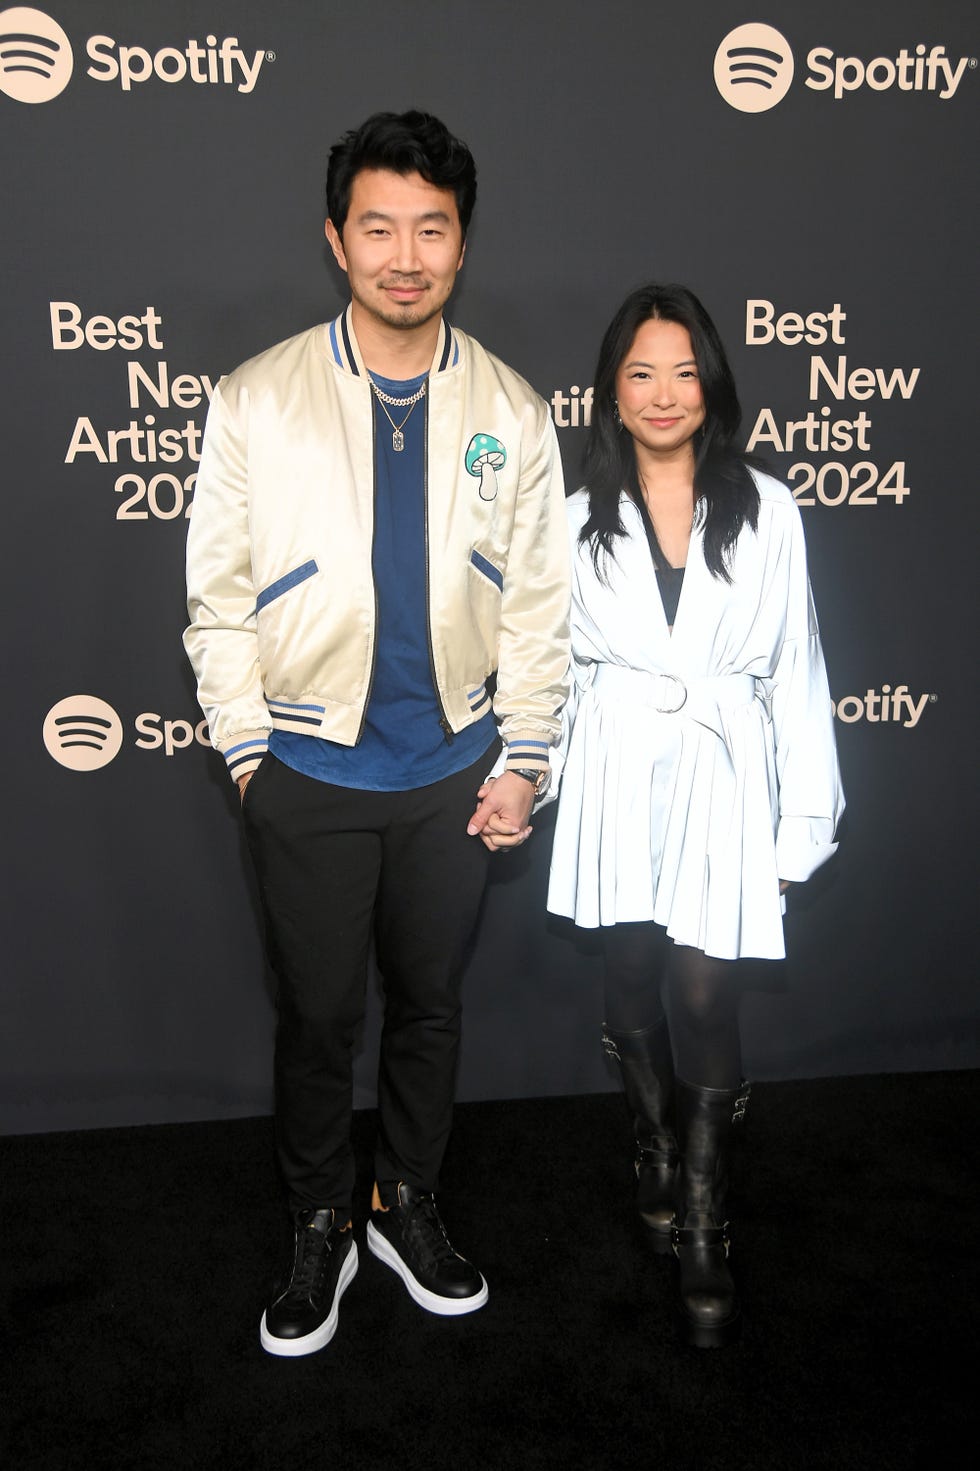 los angeles, california february 01 l r simu liu and allison hsu attend the 2024 spotify best new artist party at paramount studios on february 01, 2024 in los angeles, california photo by alberto e rodriguezwireimage,